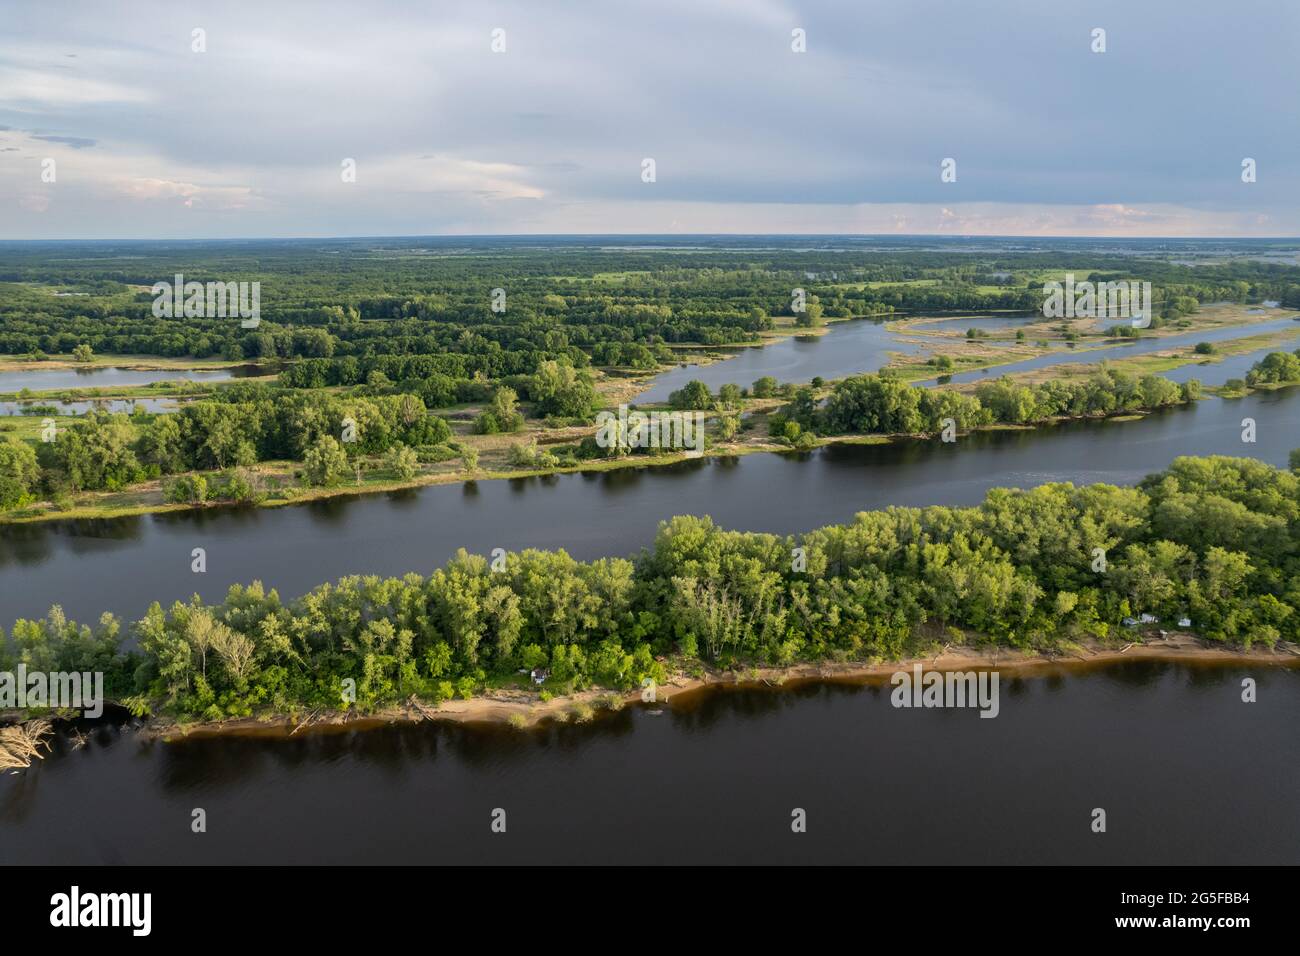 River Volga with islands, branch, girt with fishing boats and camps, aerial view Stock Photo